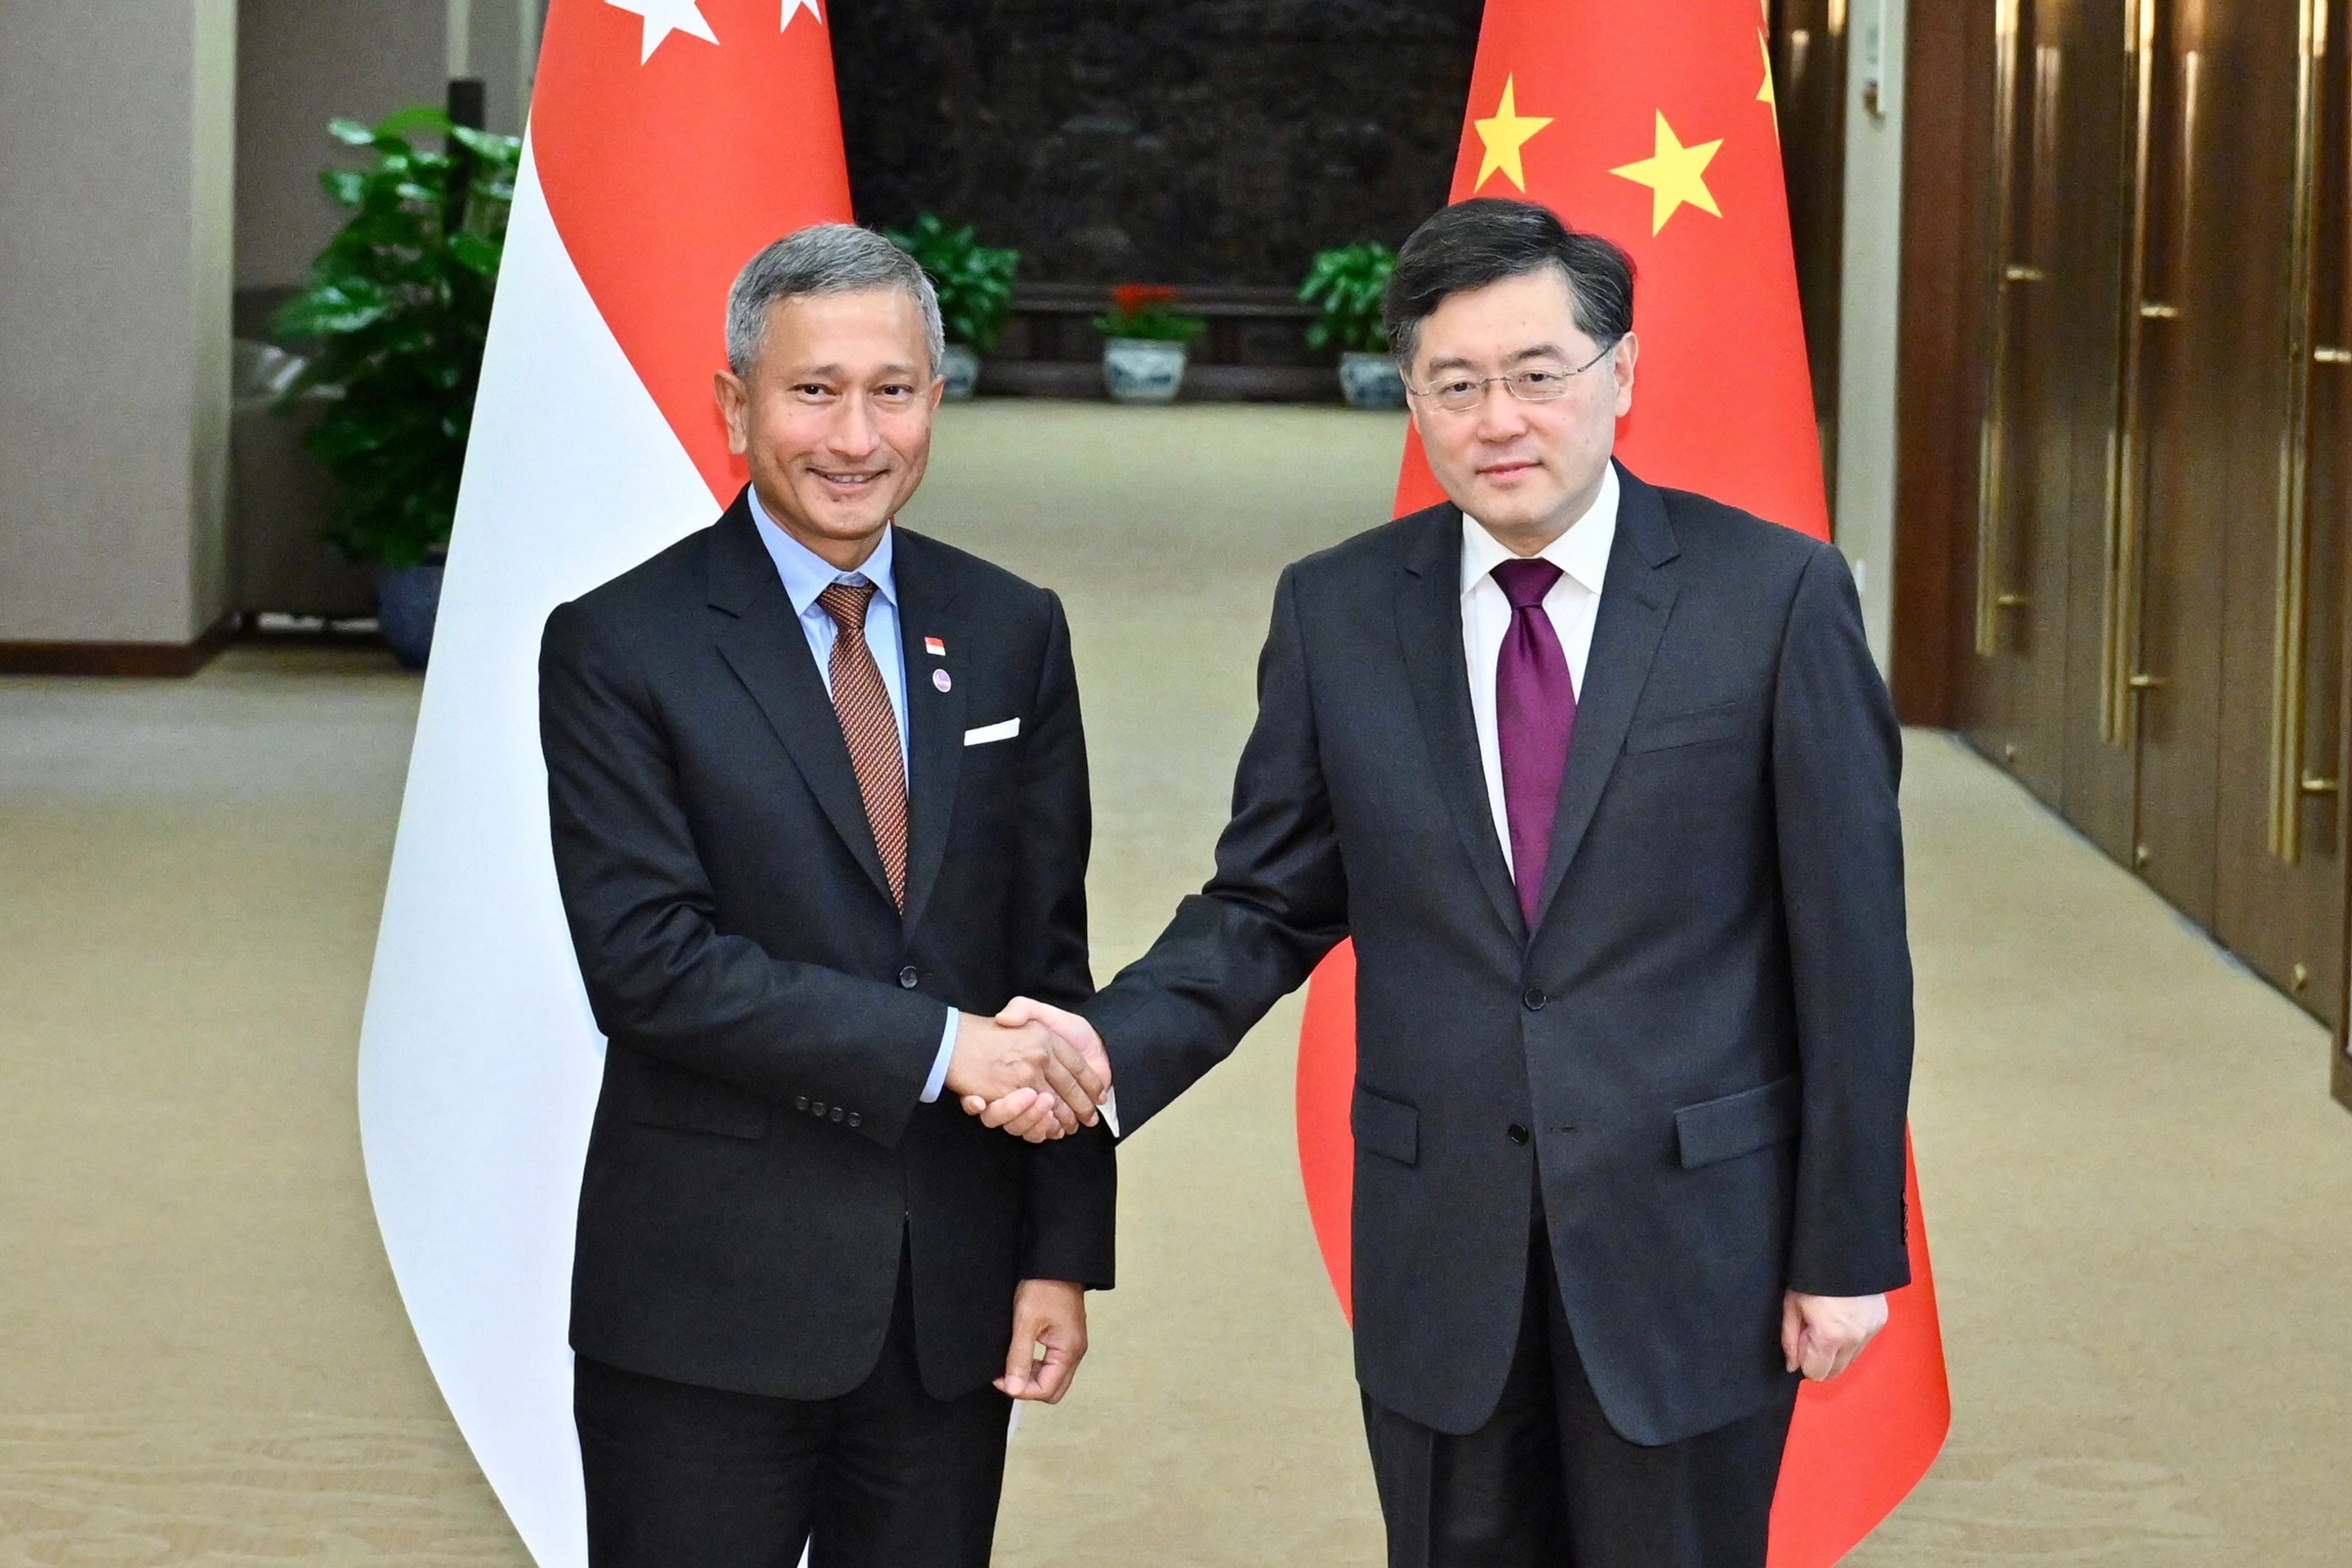 Chinese Foreign Minister Qin Gang (right) meets Singaporean foreign minister Vivian Balakrishnan in Beijing on Monday. Qin told Balakrishnan China firmly supported Asean’s leading role in the region. Photo: Xinhua